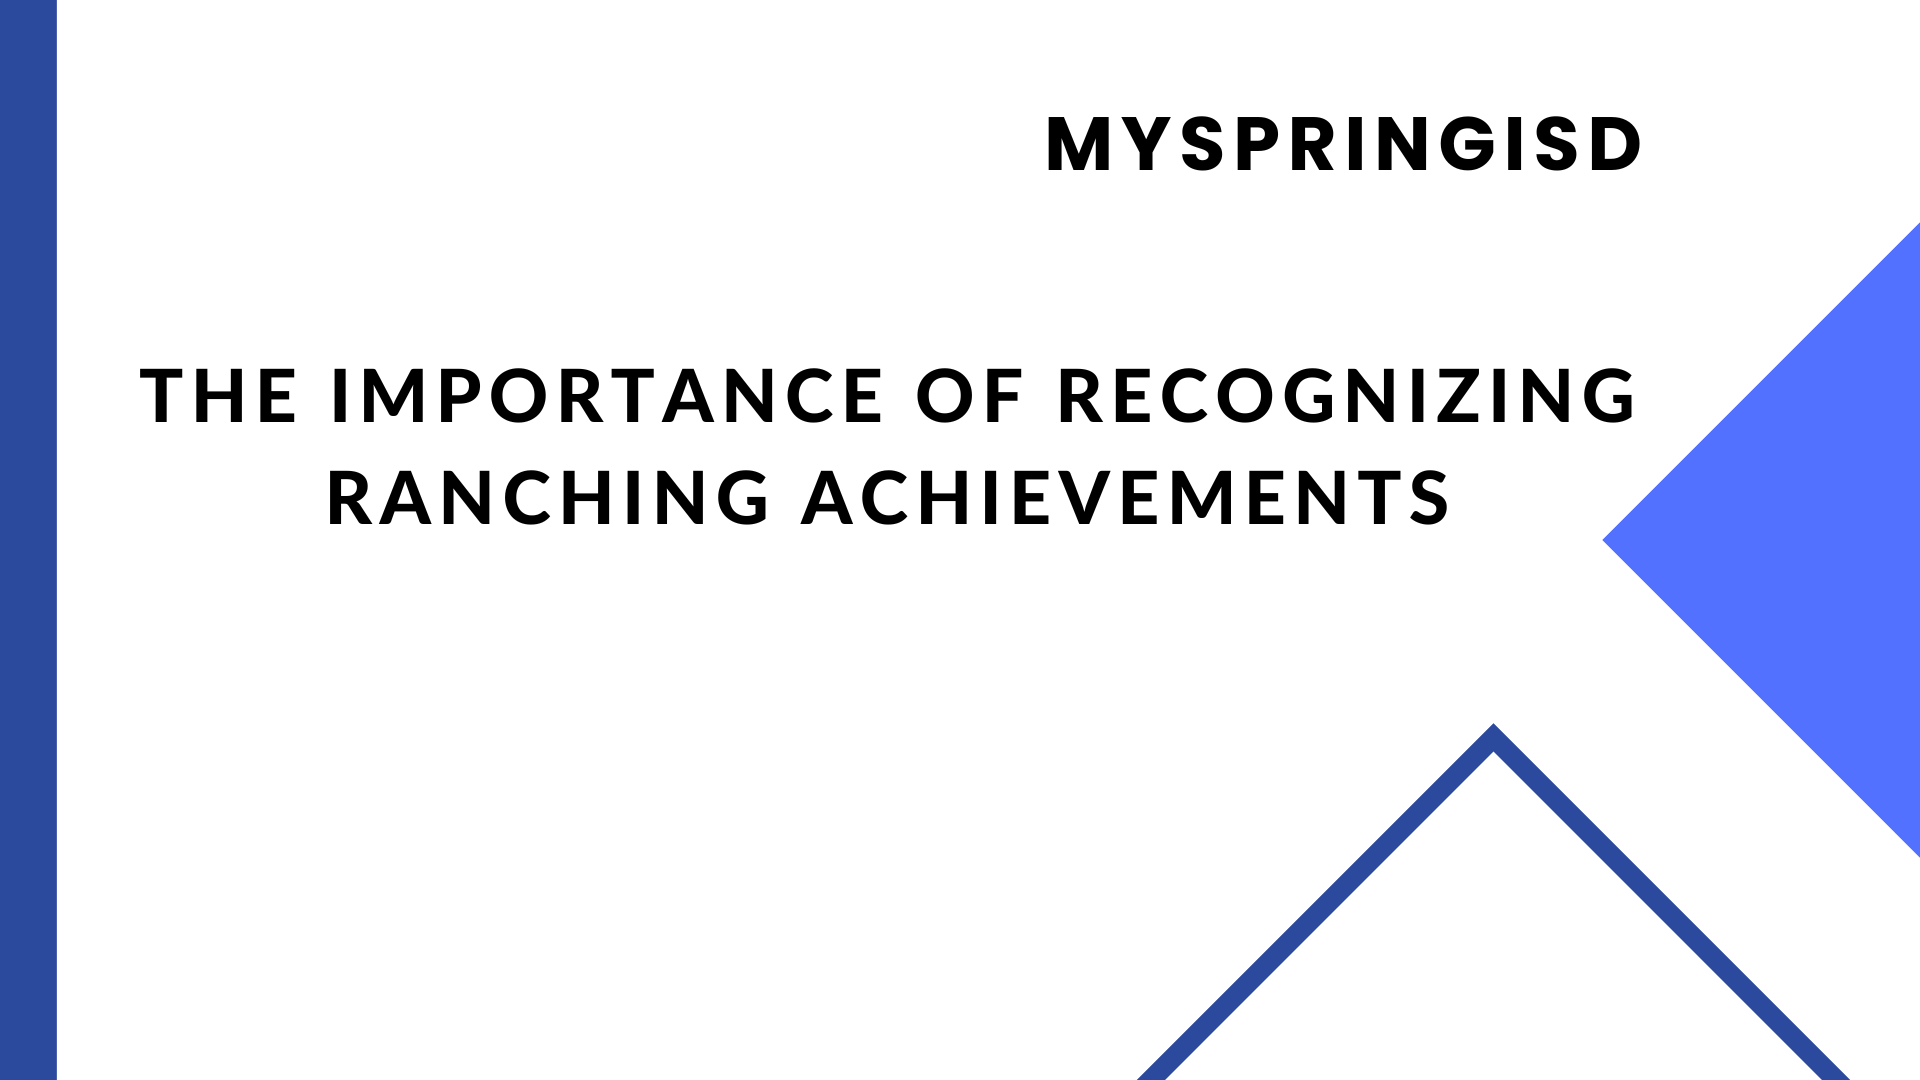 The Importance of Recognizing Ranching Achievements